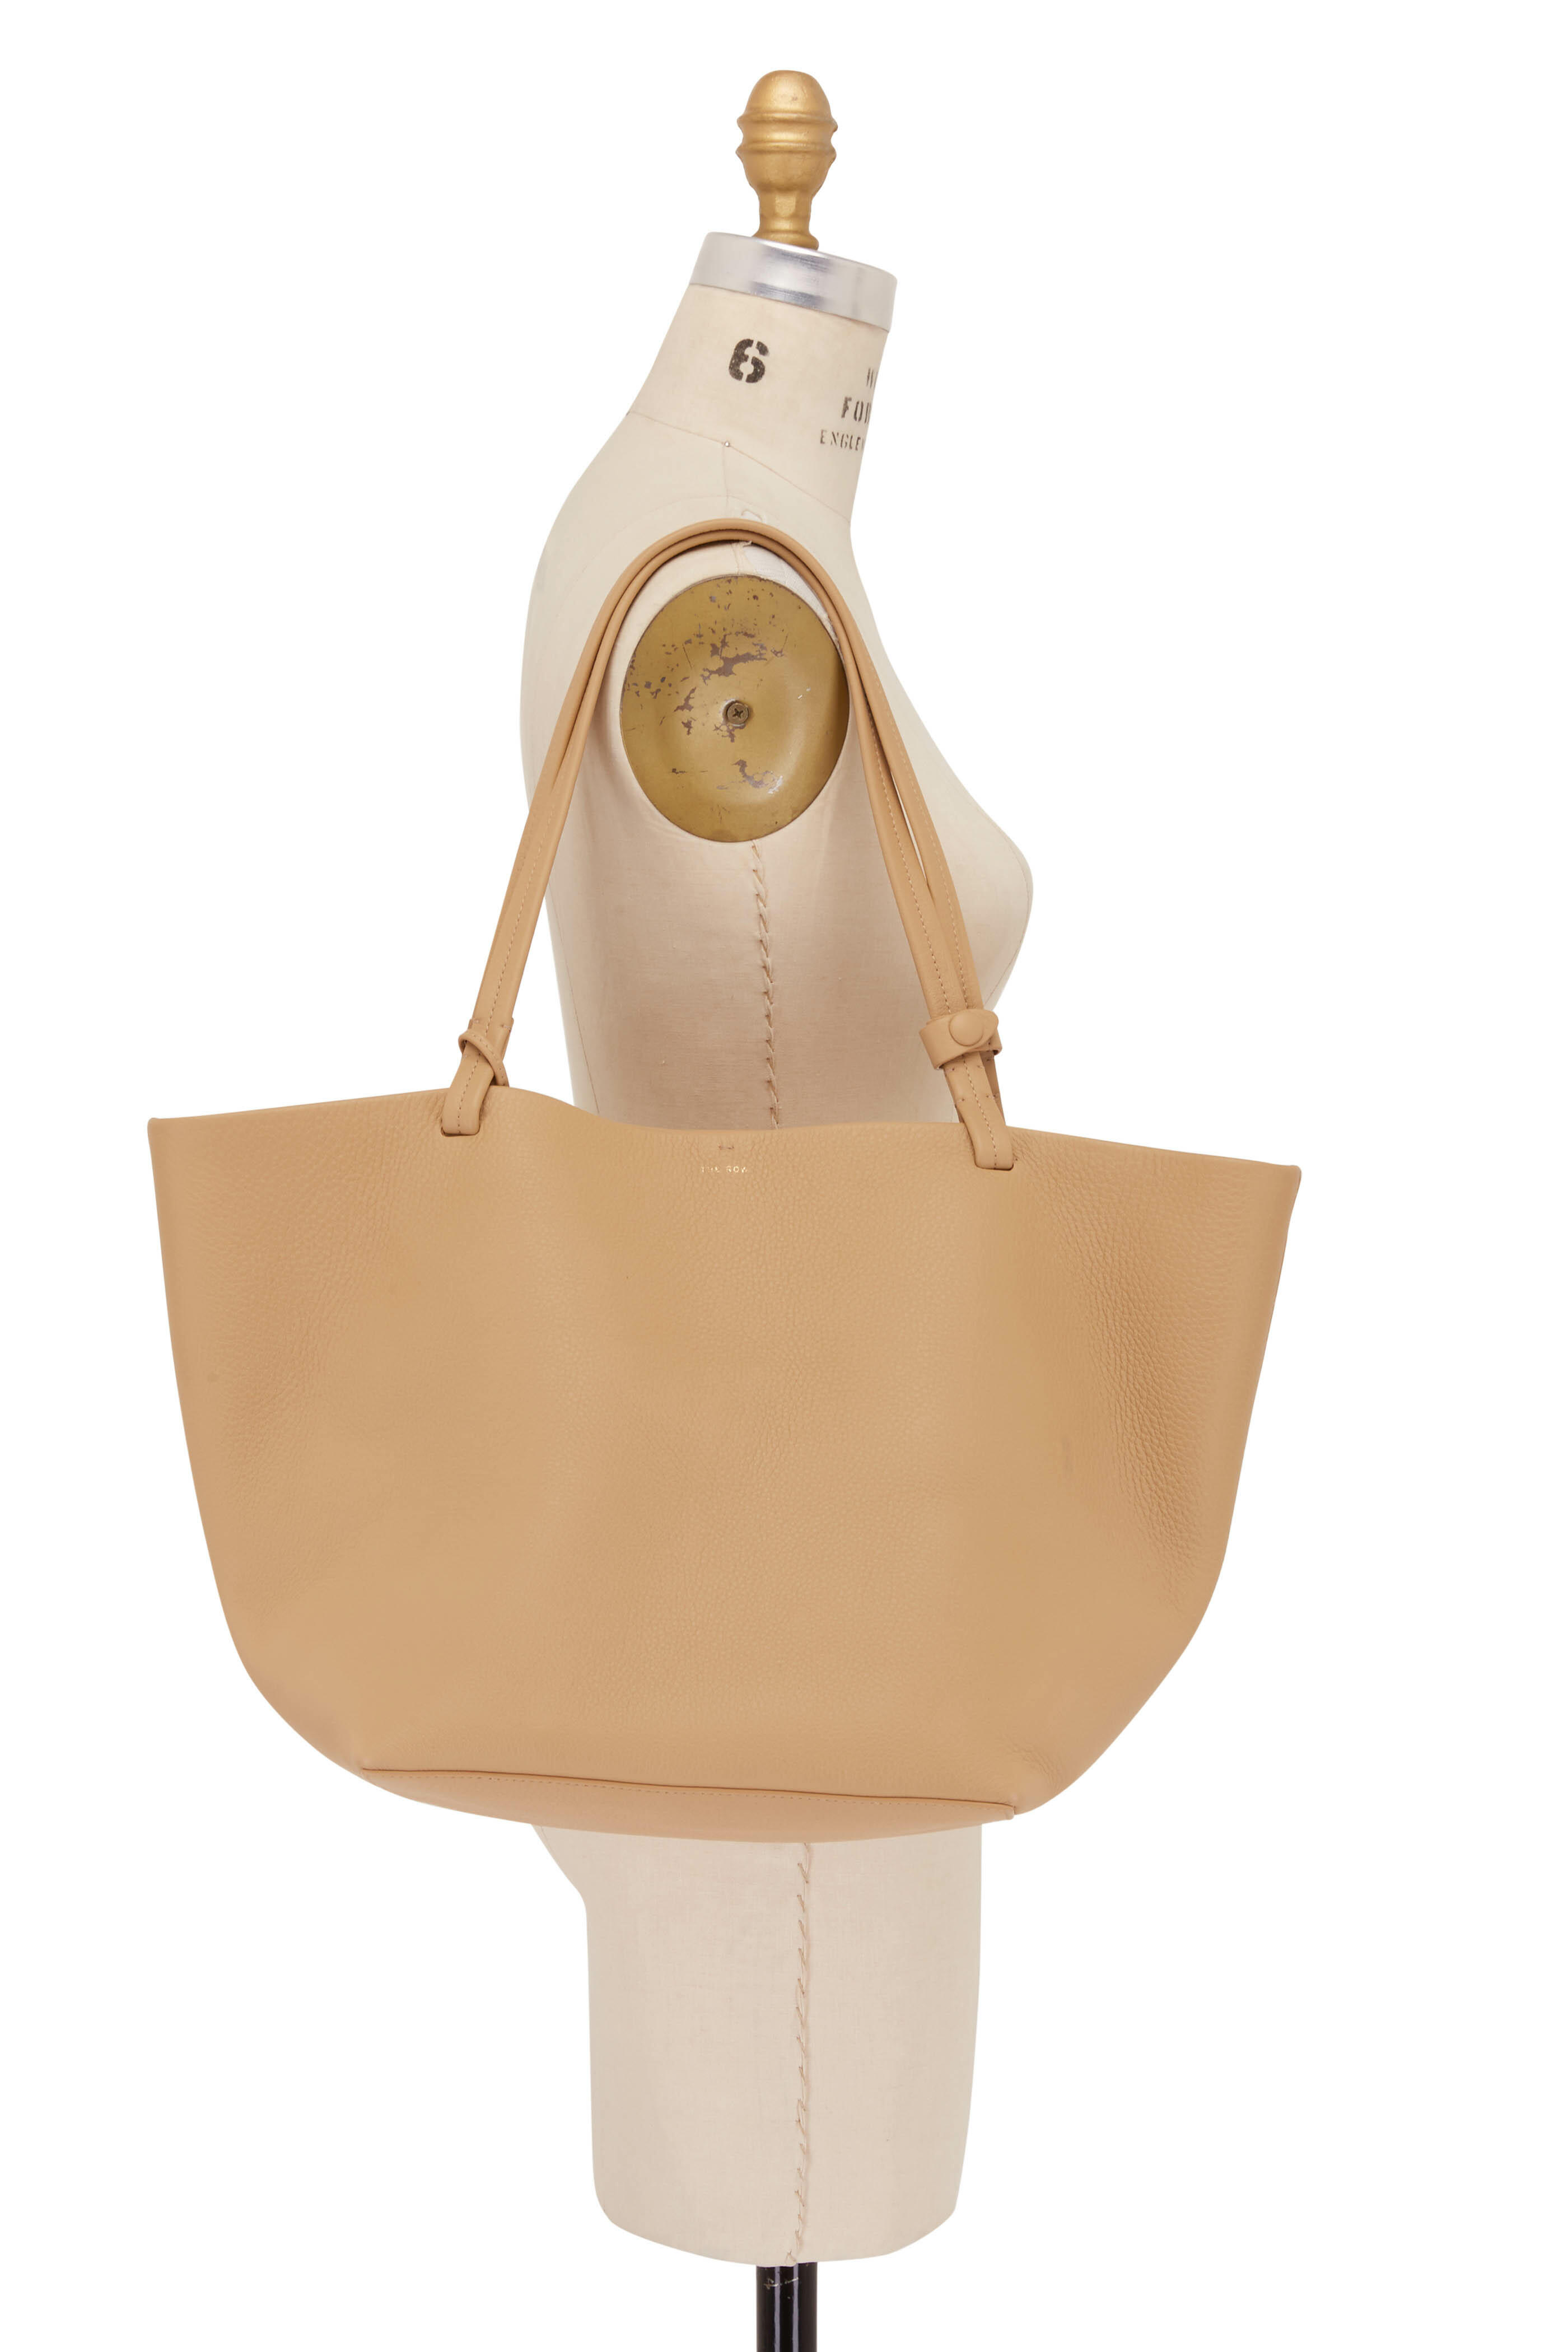 The Row - Park Tote Three Beige Leather Tote | Mitchell Stores